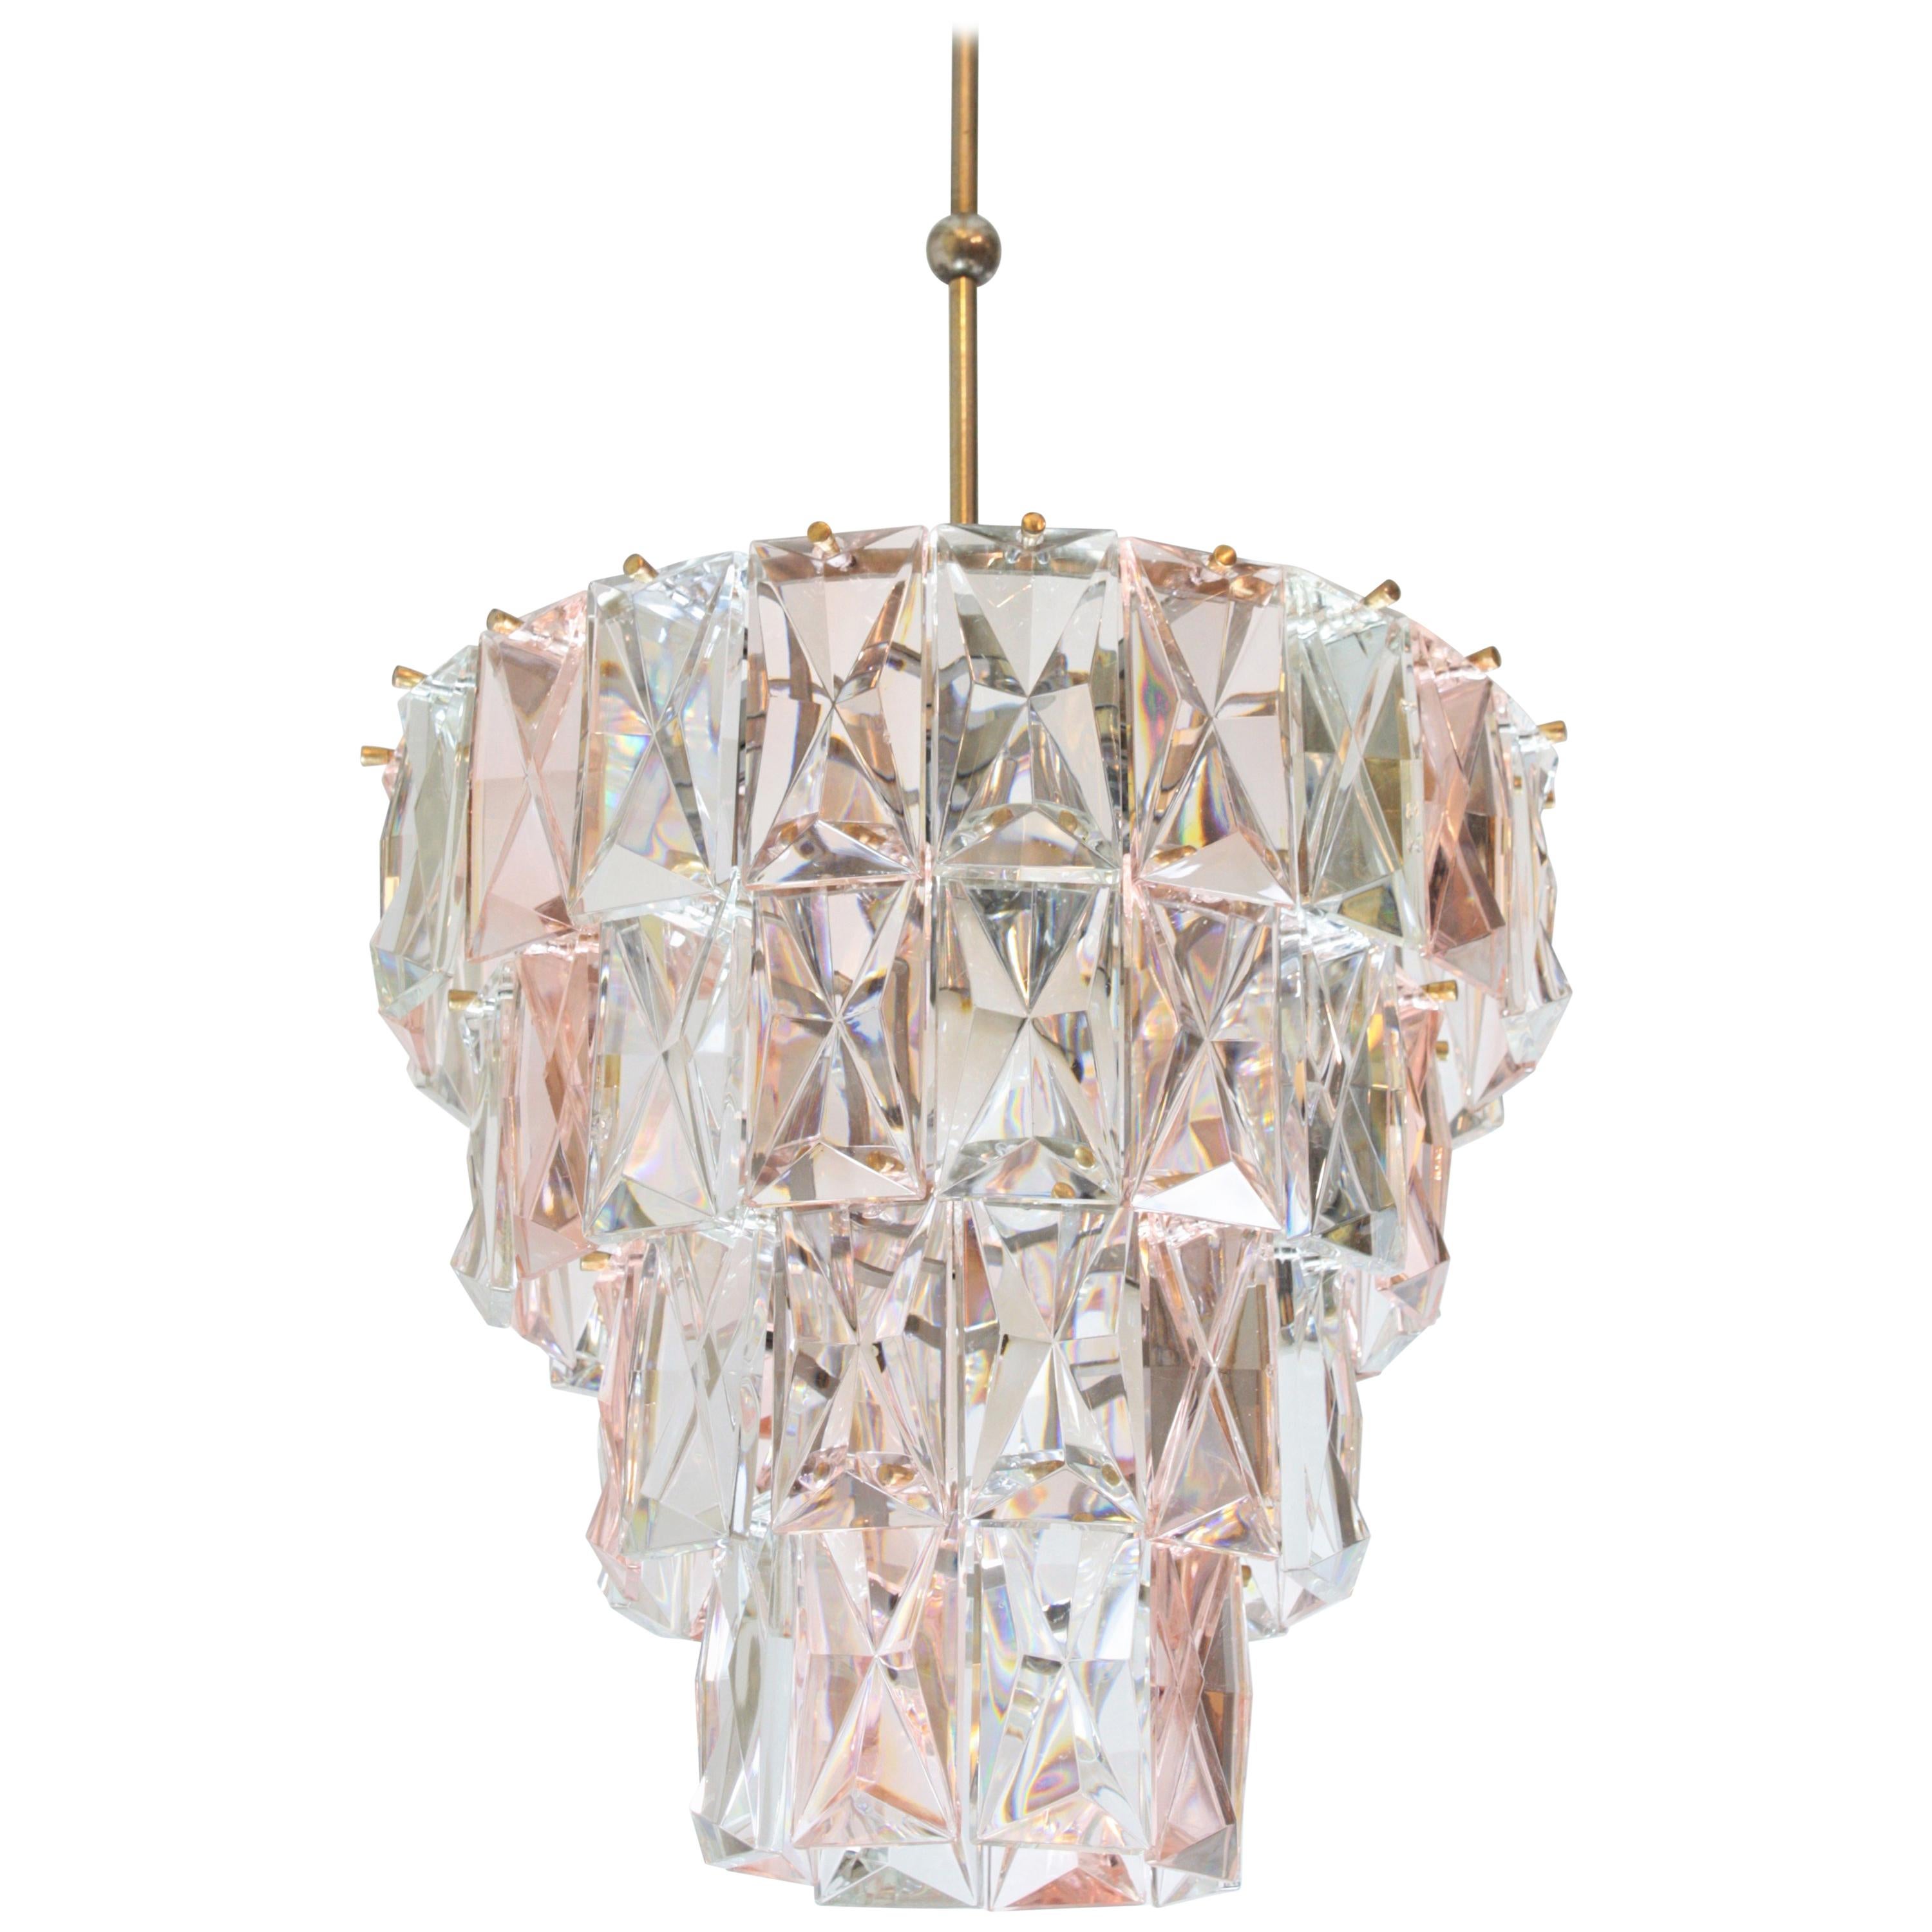 Mid-Century Modern Midcentury Kinkeldey Chandelier in Pink and Clear Faceted Crystal, 1960s For Sale